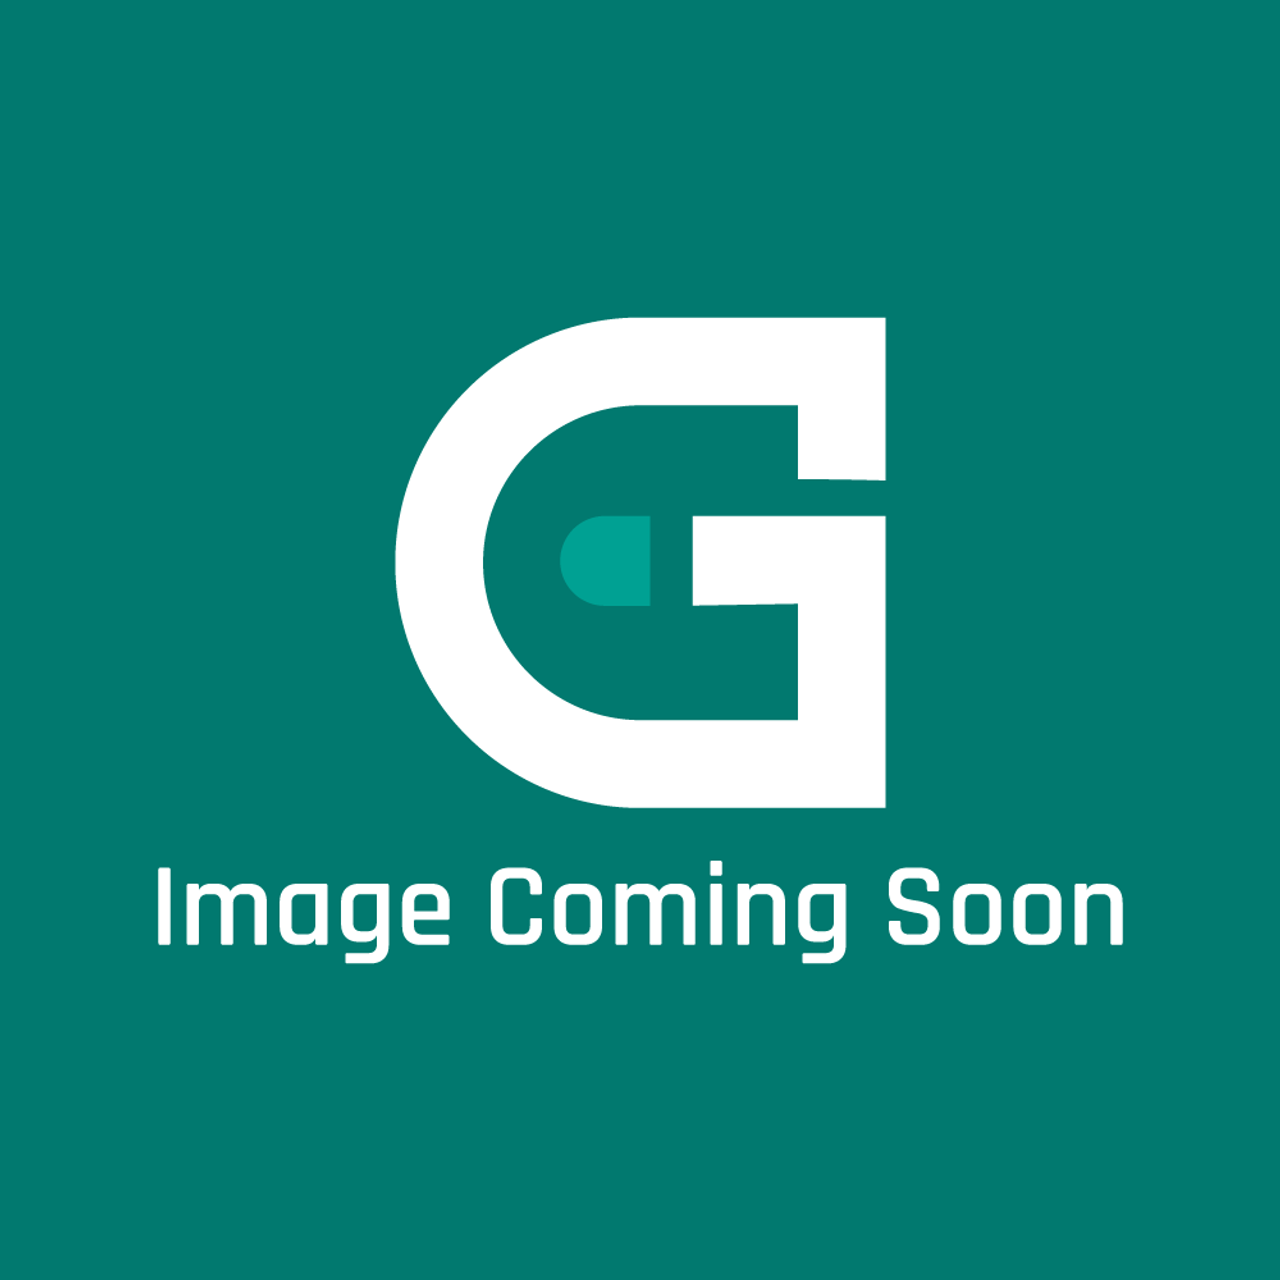 AGA Marvel AE2M280113 - T/Couple Securing Bracket H/Spot T/C - Image Coming Soon!